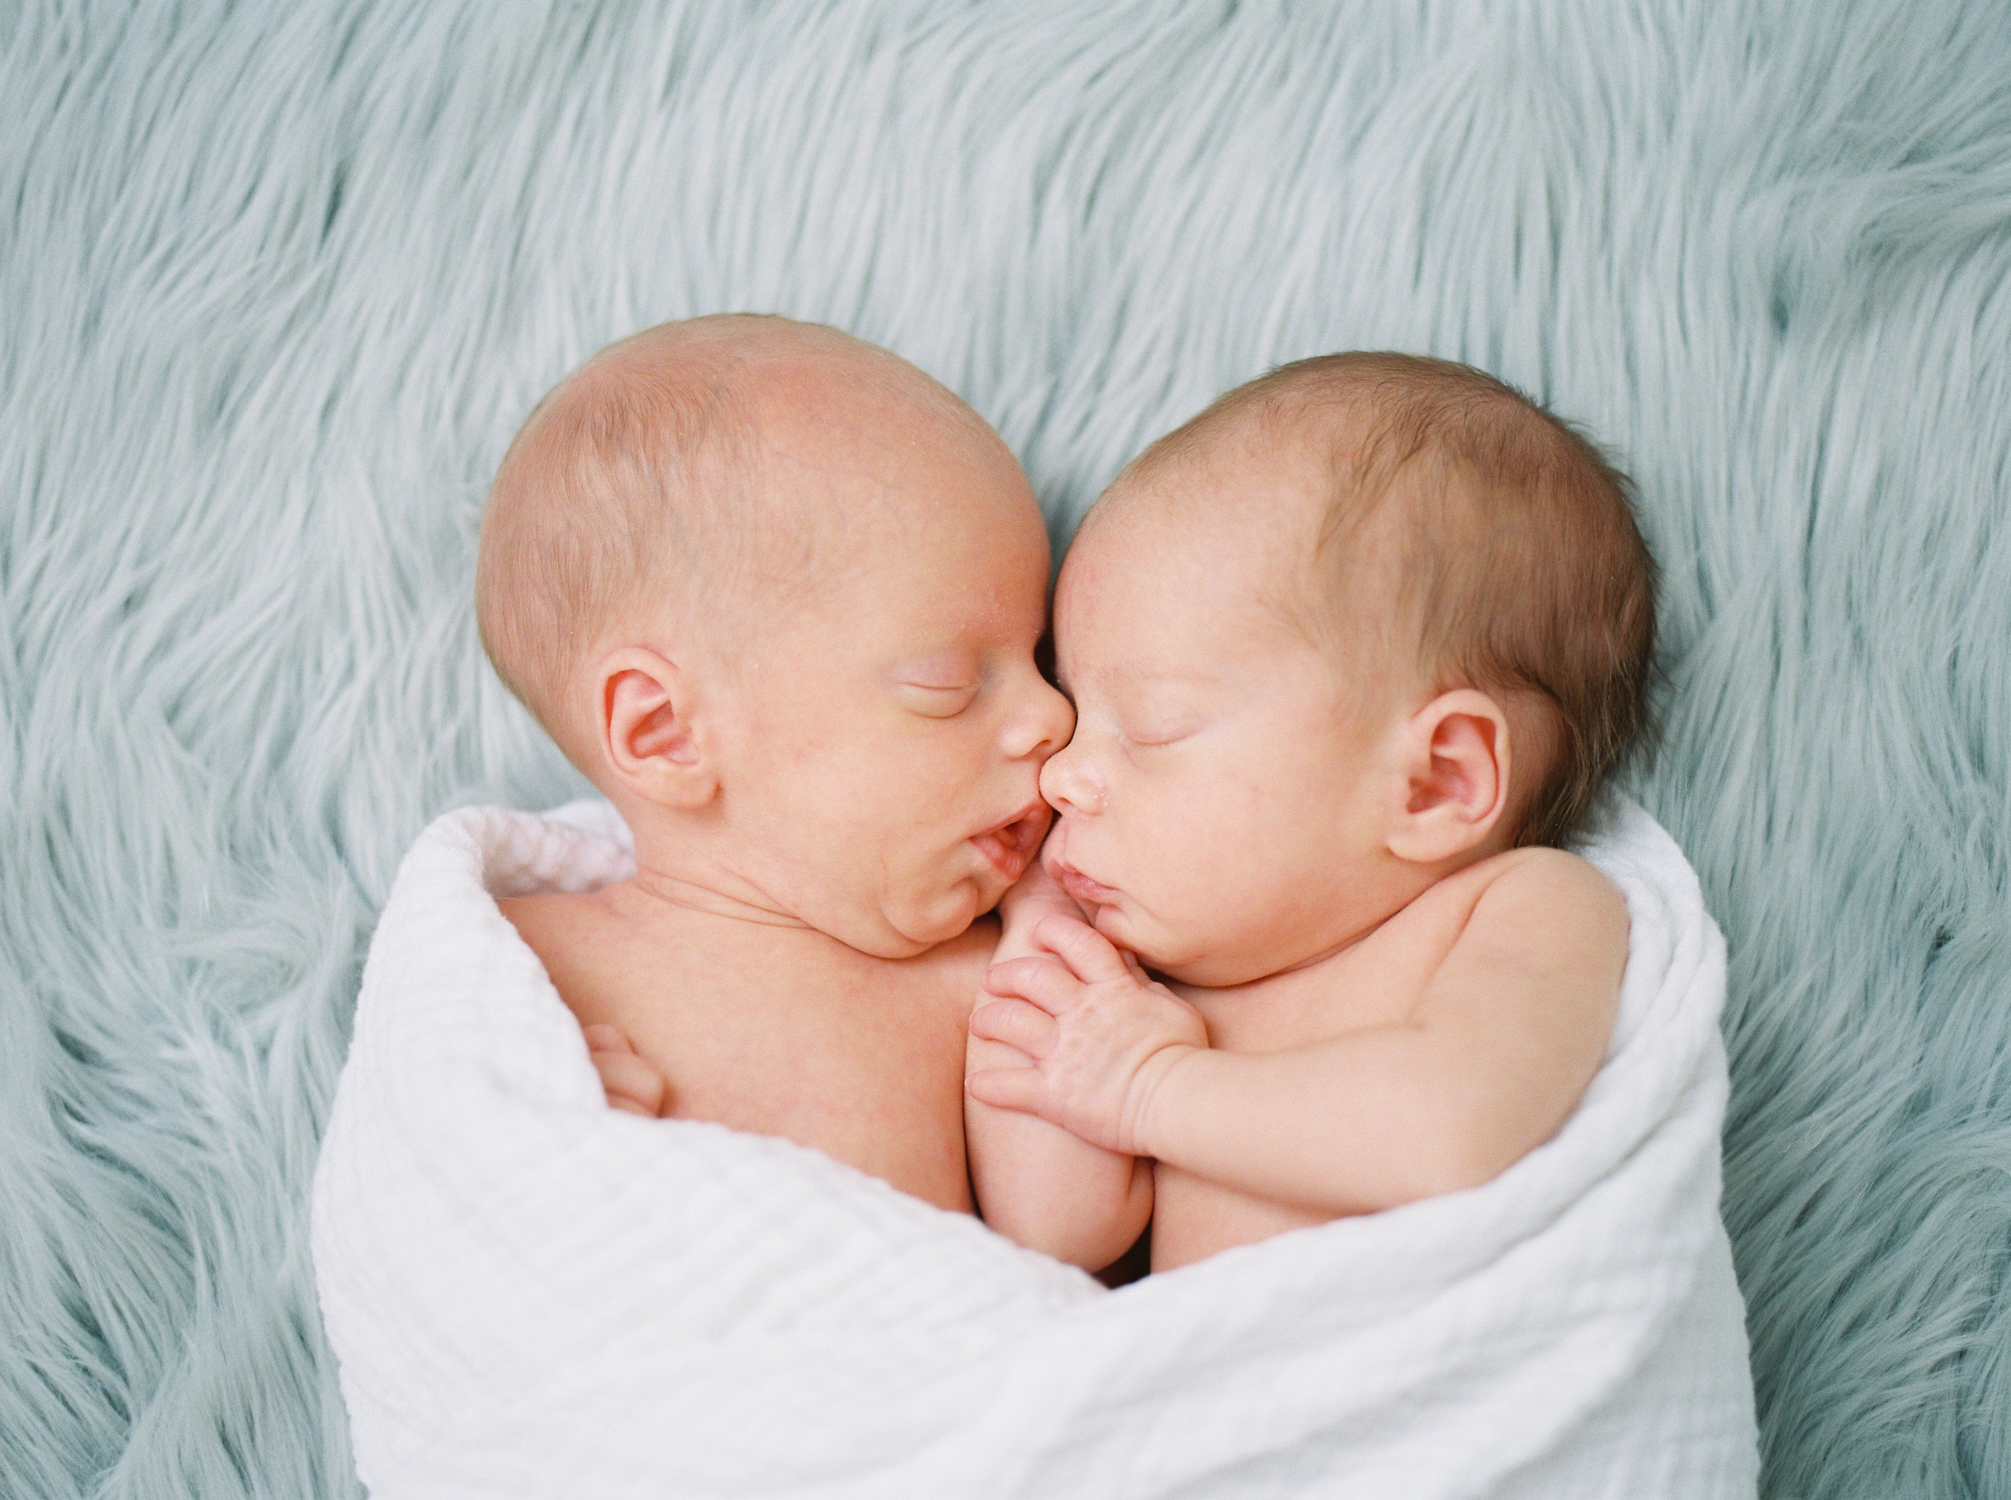 photograph of newborn twin babies wrapped snuggling together in a white blanket.